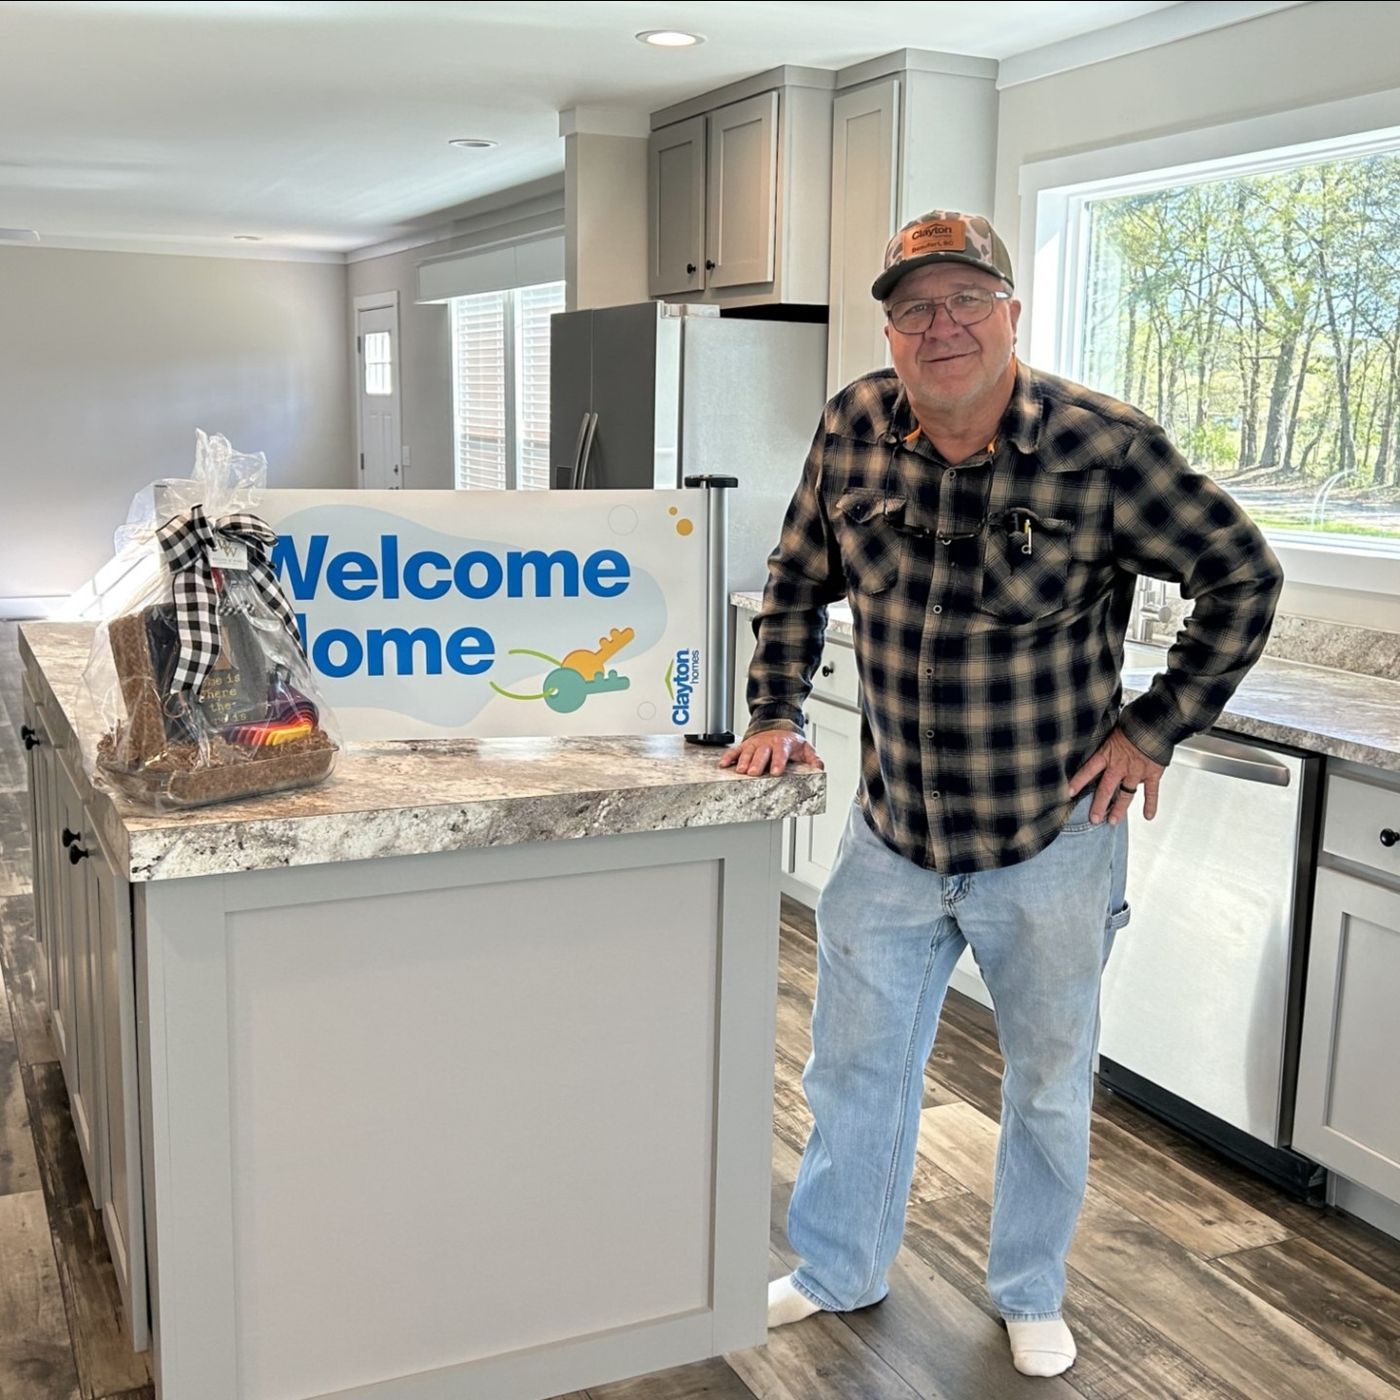 Dale R. welcome home image